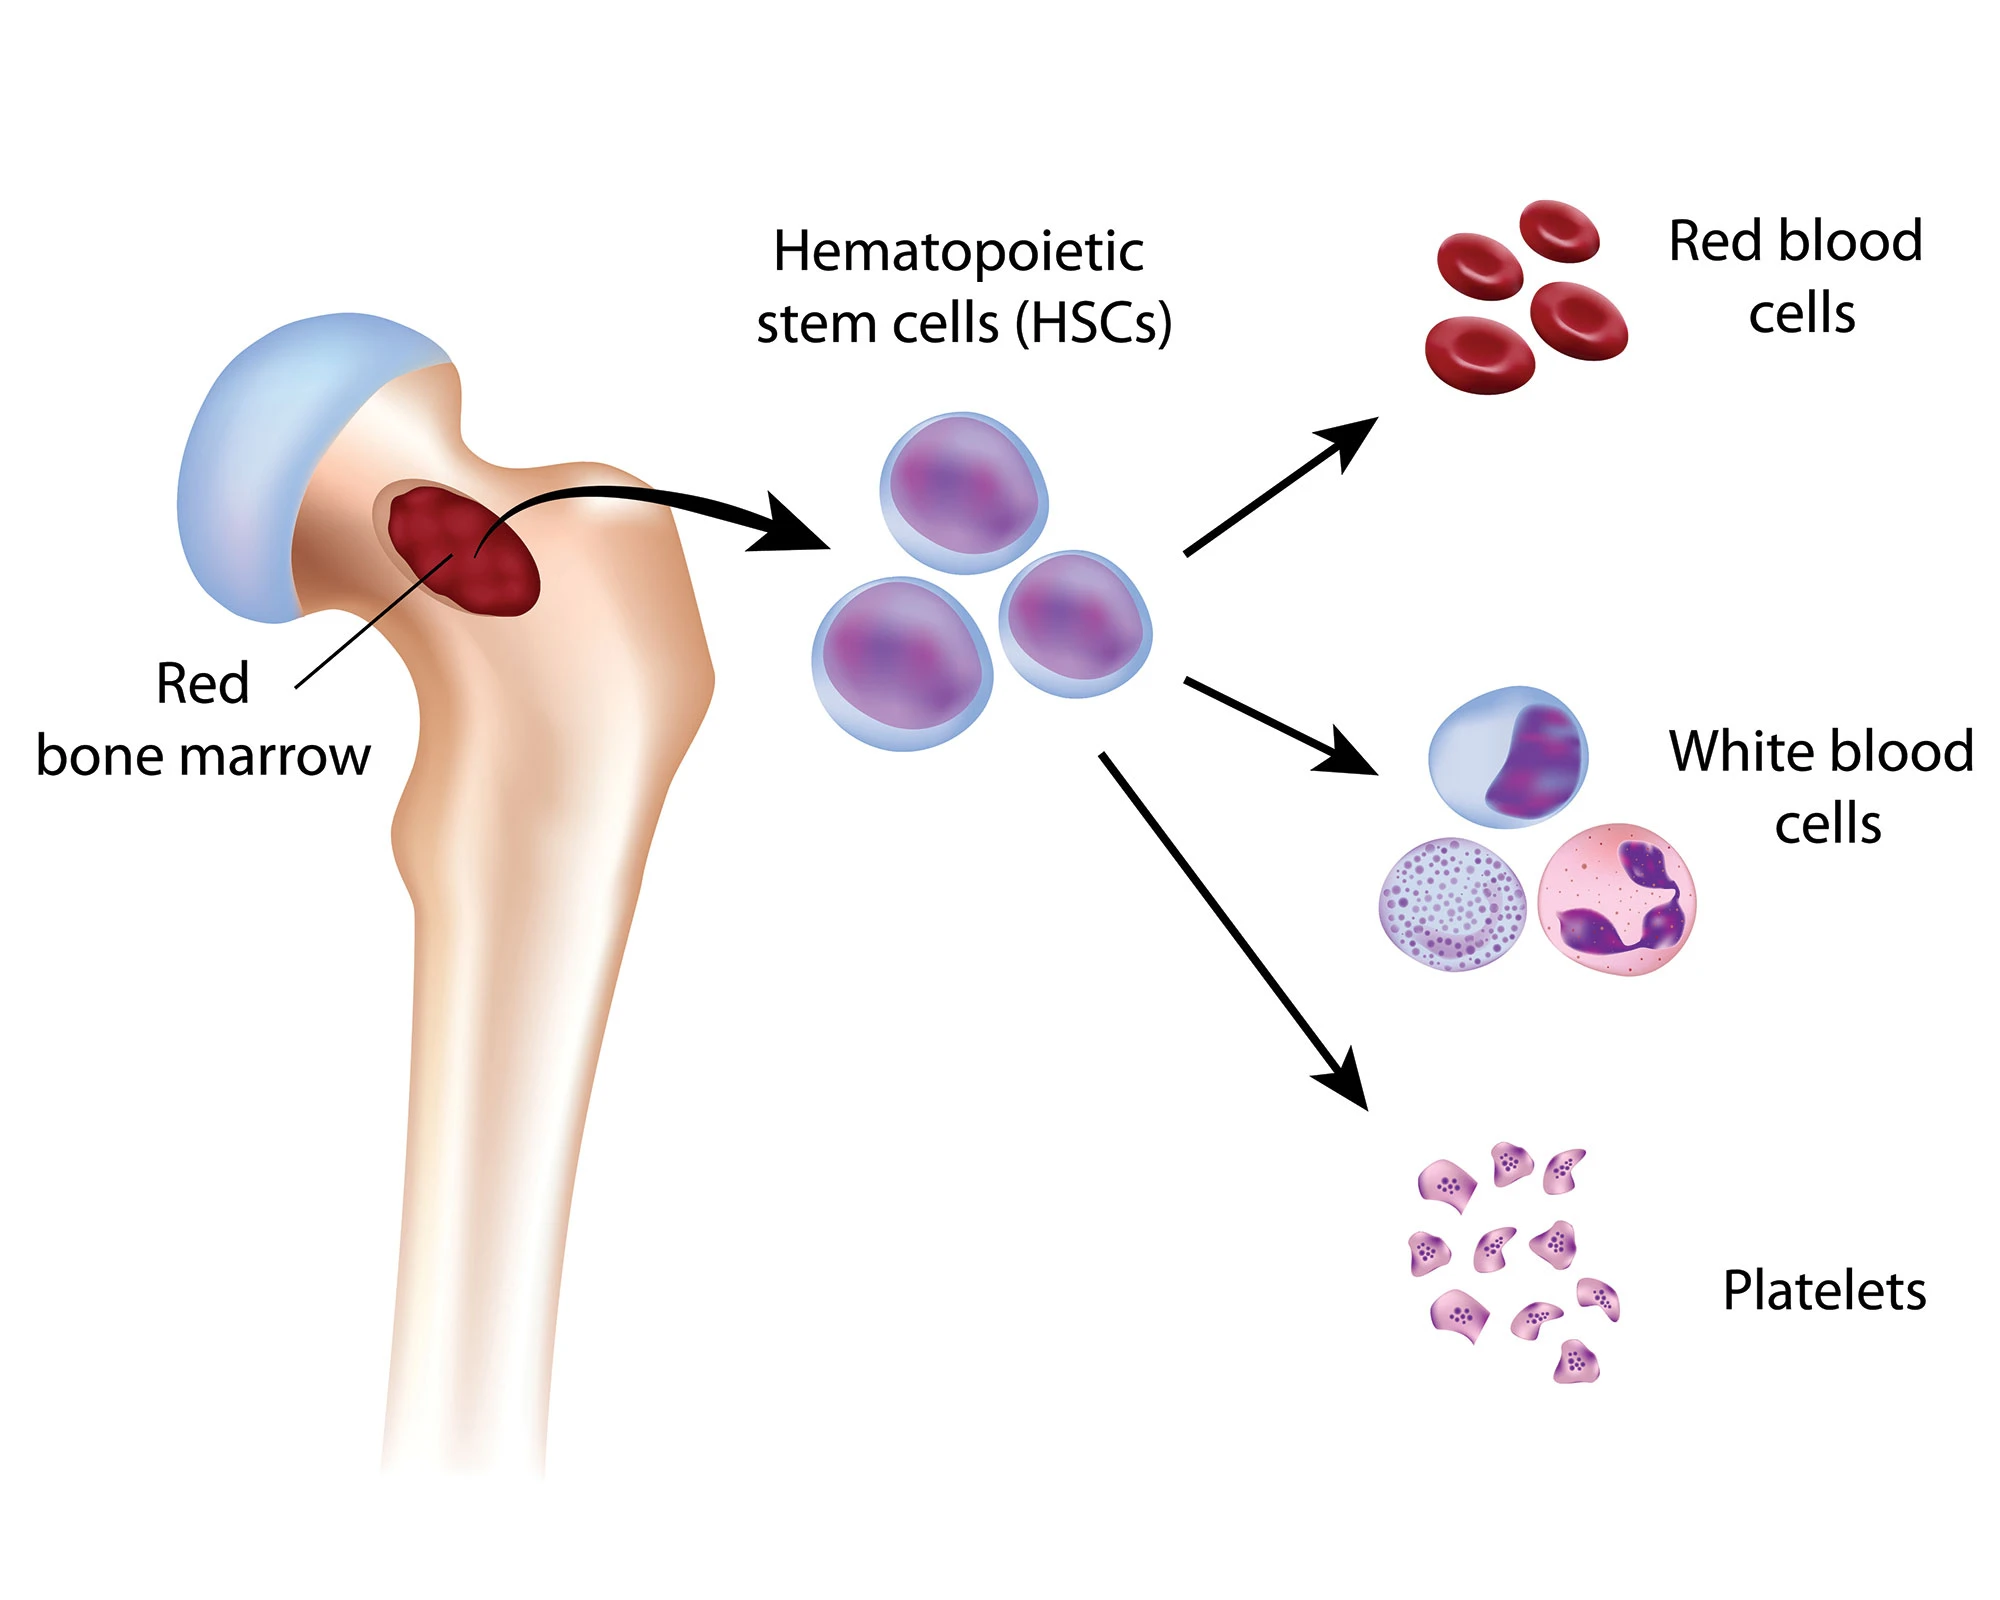 image showing formation of different blood cells in bone marrow